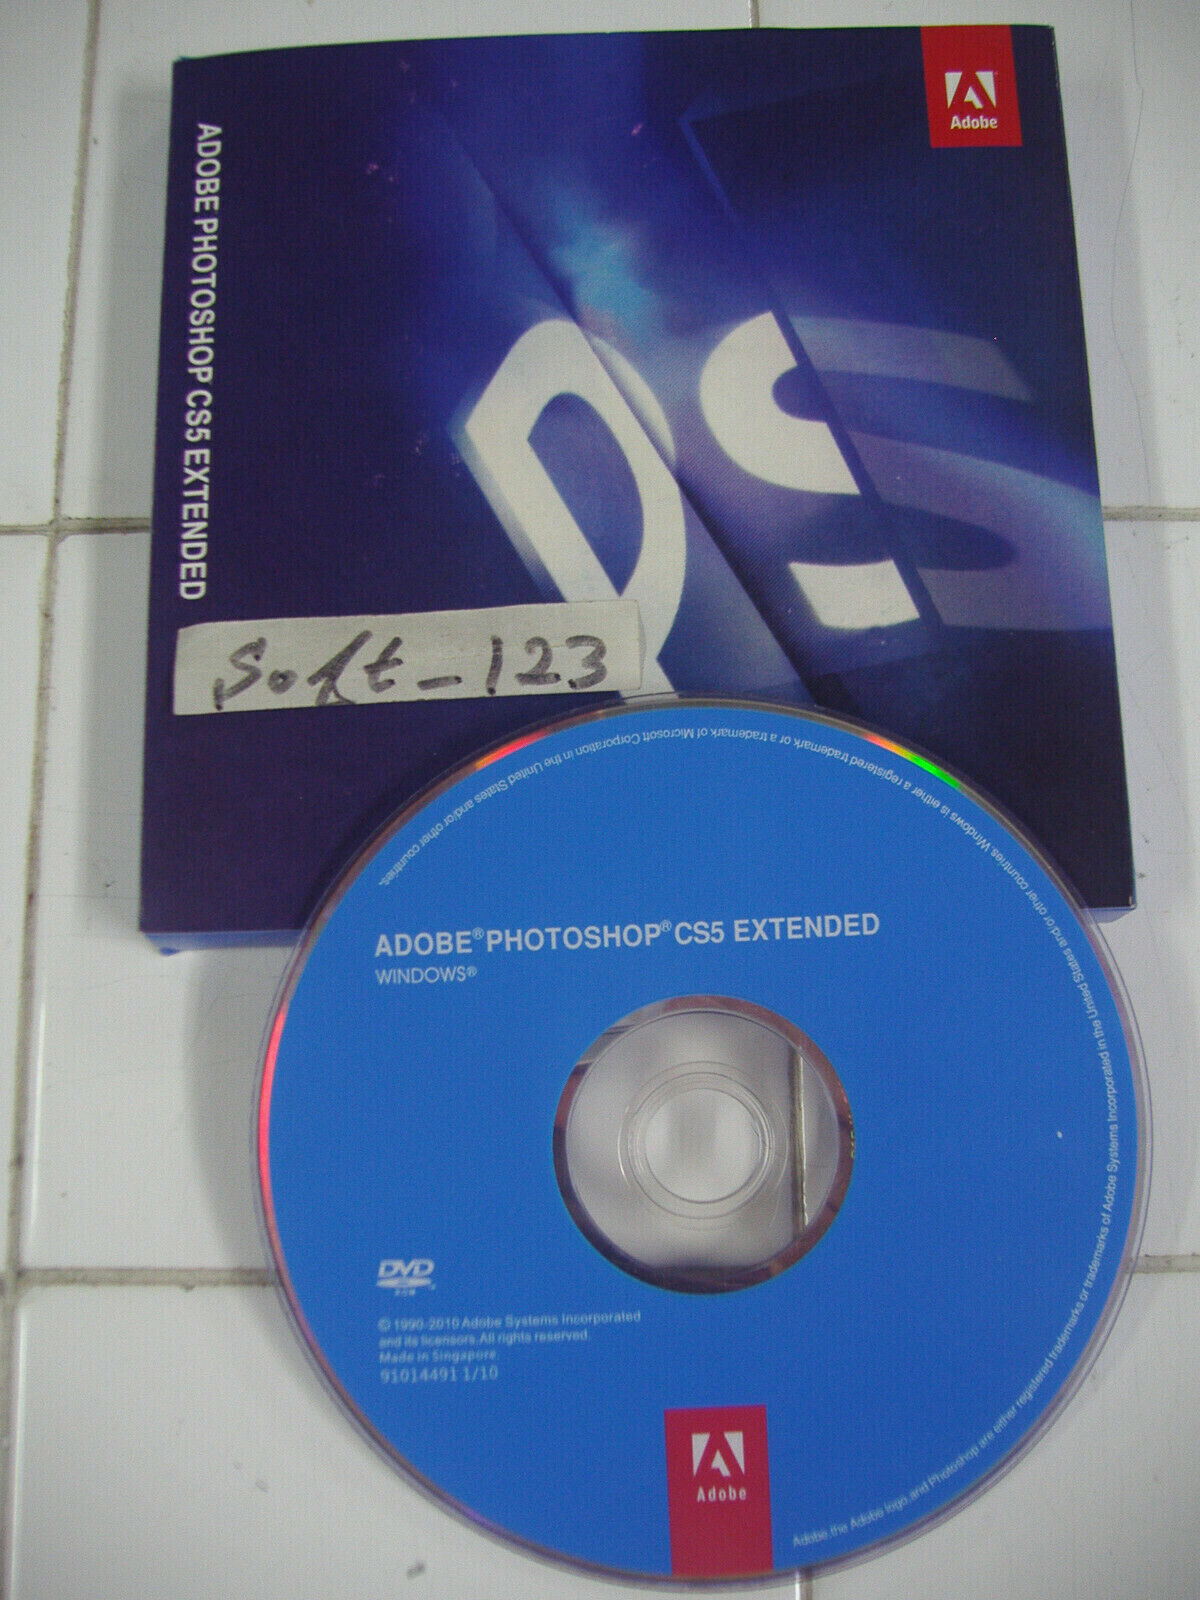 Adobe Photoshop CS5 Extended 64 & 32 bit for Windows Full Retail w/Serial Number